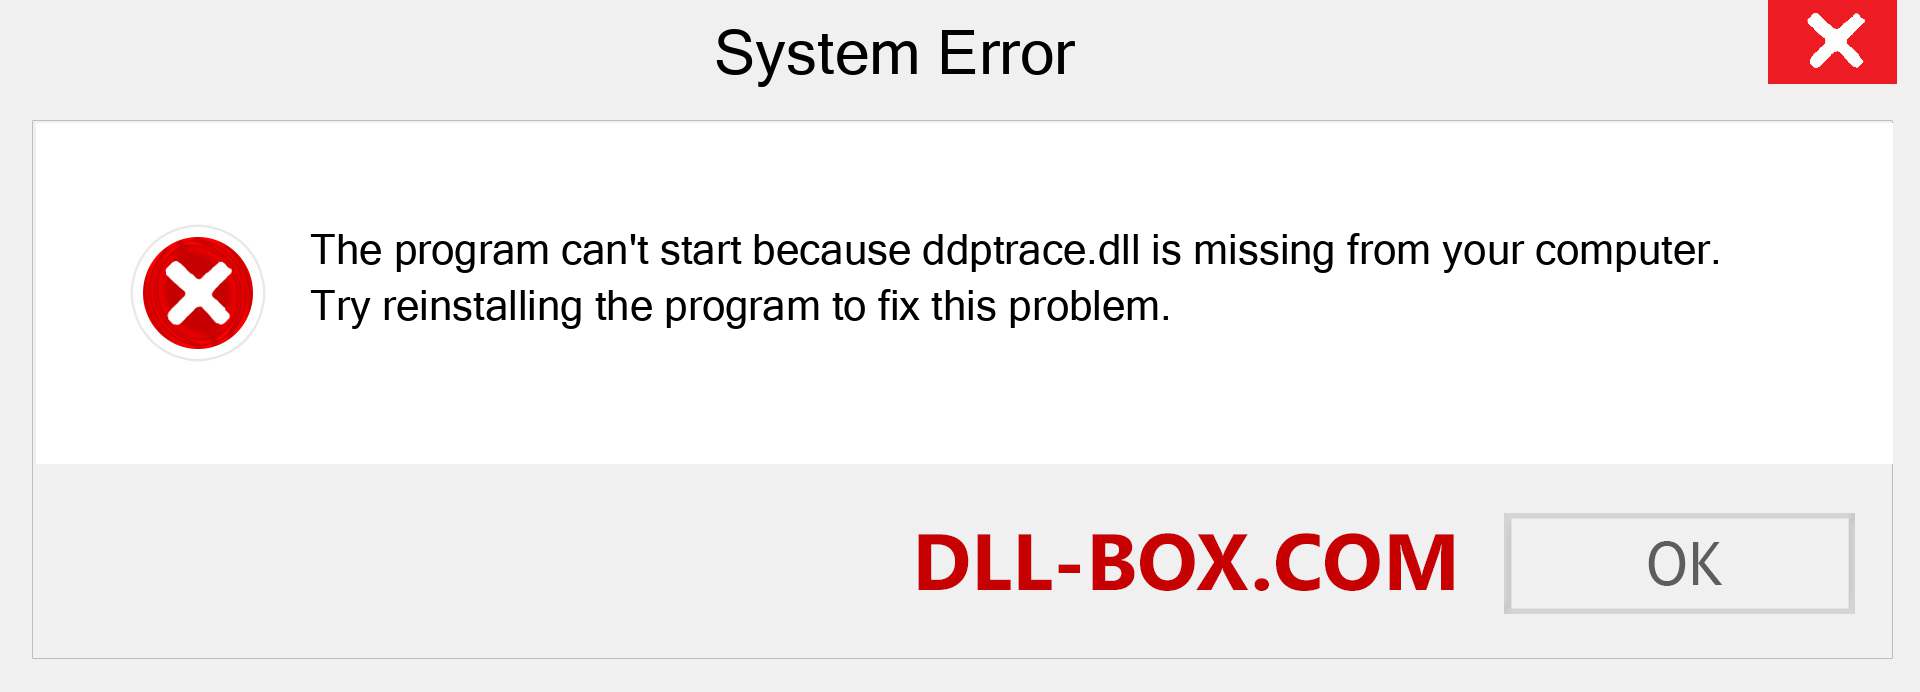  ddptrace.dll file is missing?. Download for Windows 7, 8, 10 - Fix  ddptrace dll Missing Error on Windows, photos, images